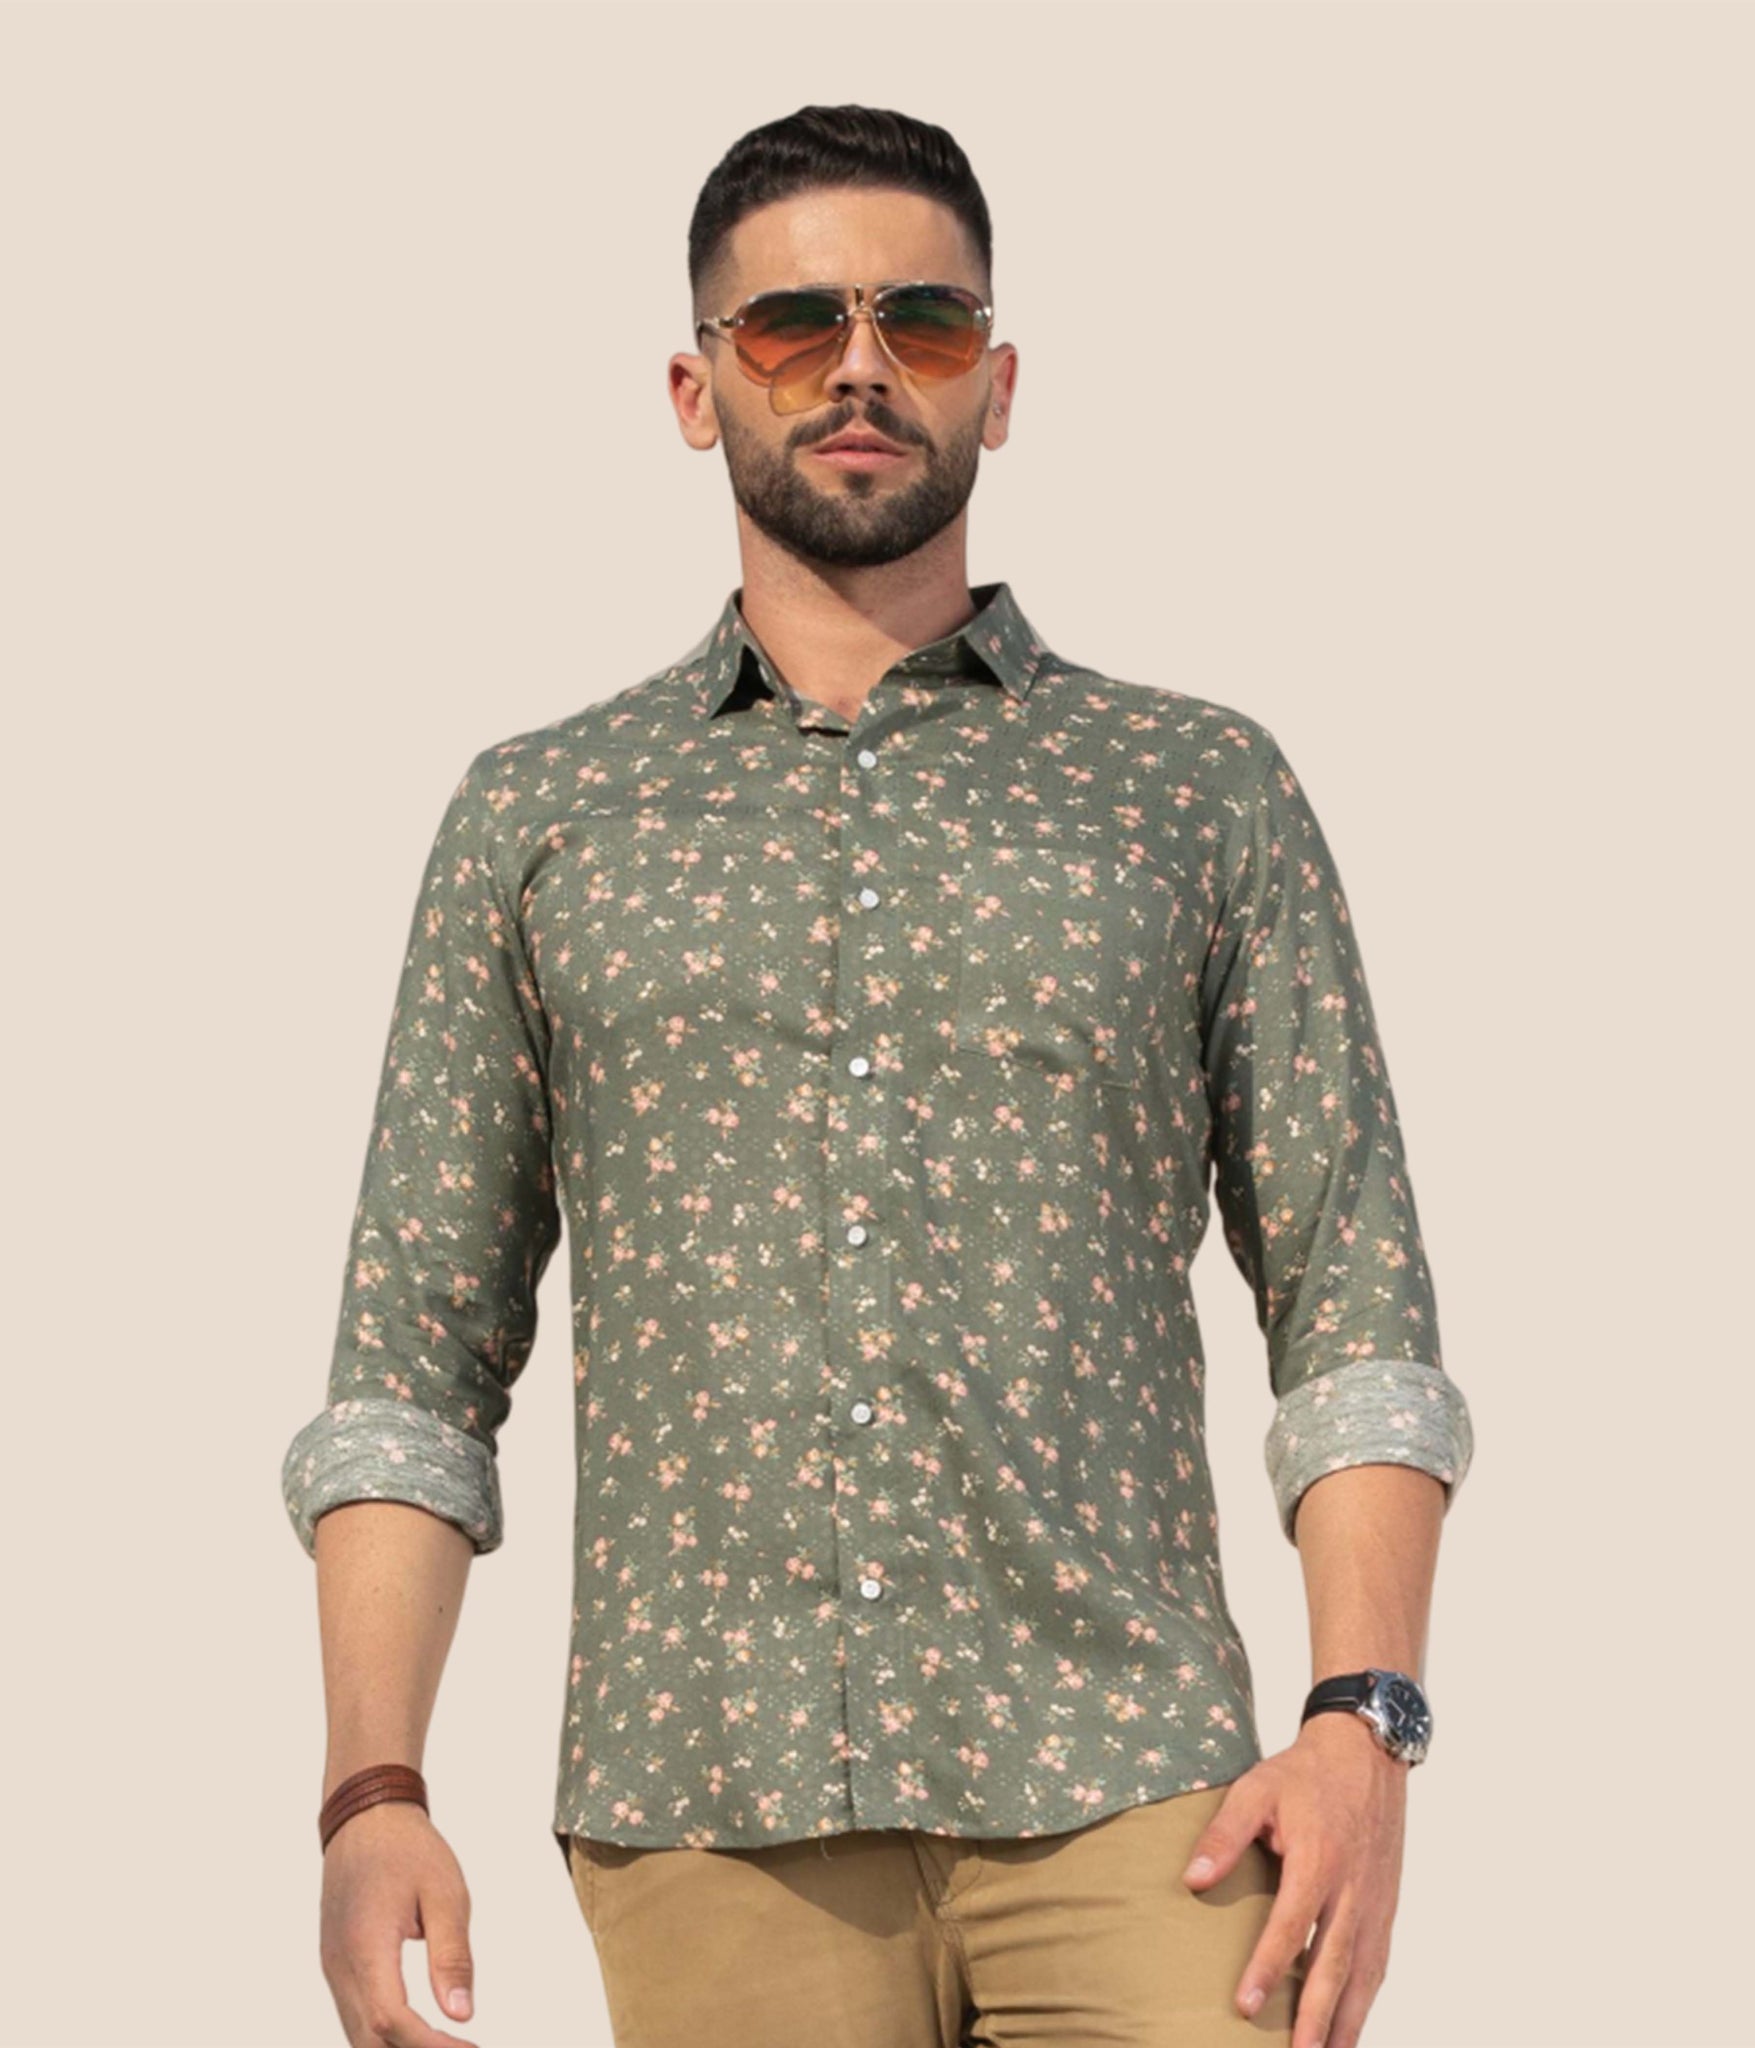 Men's floral printed shirt in dusty green